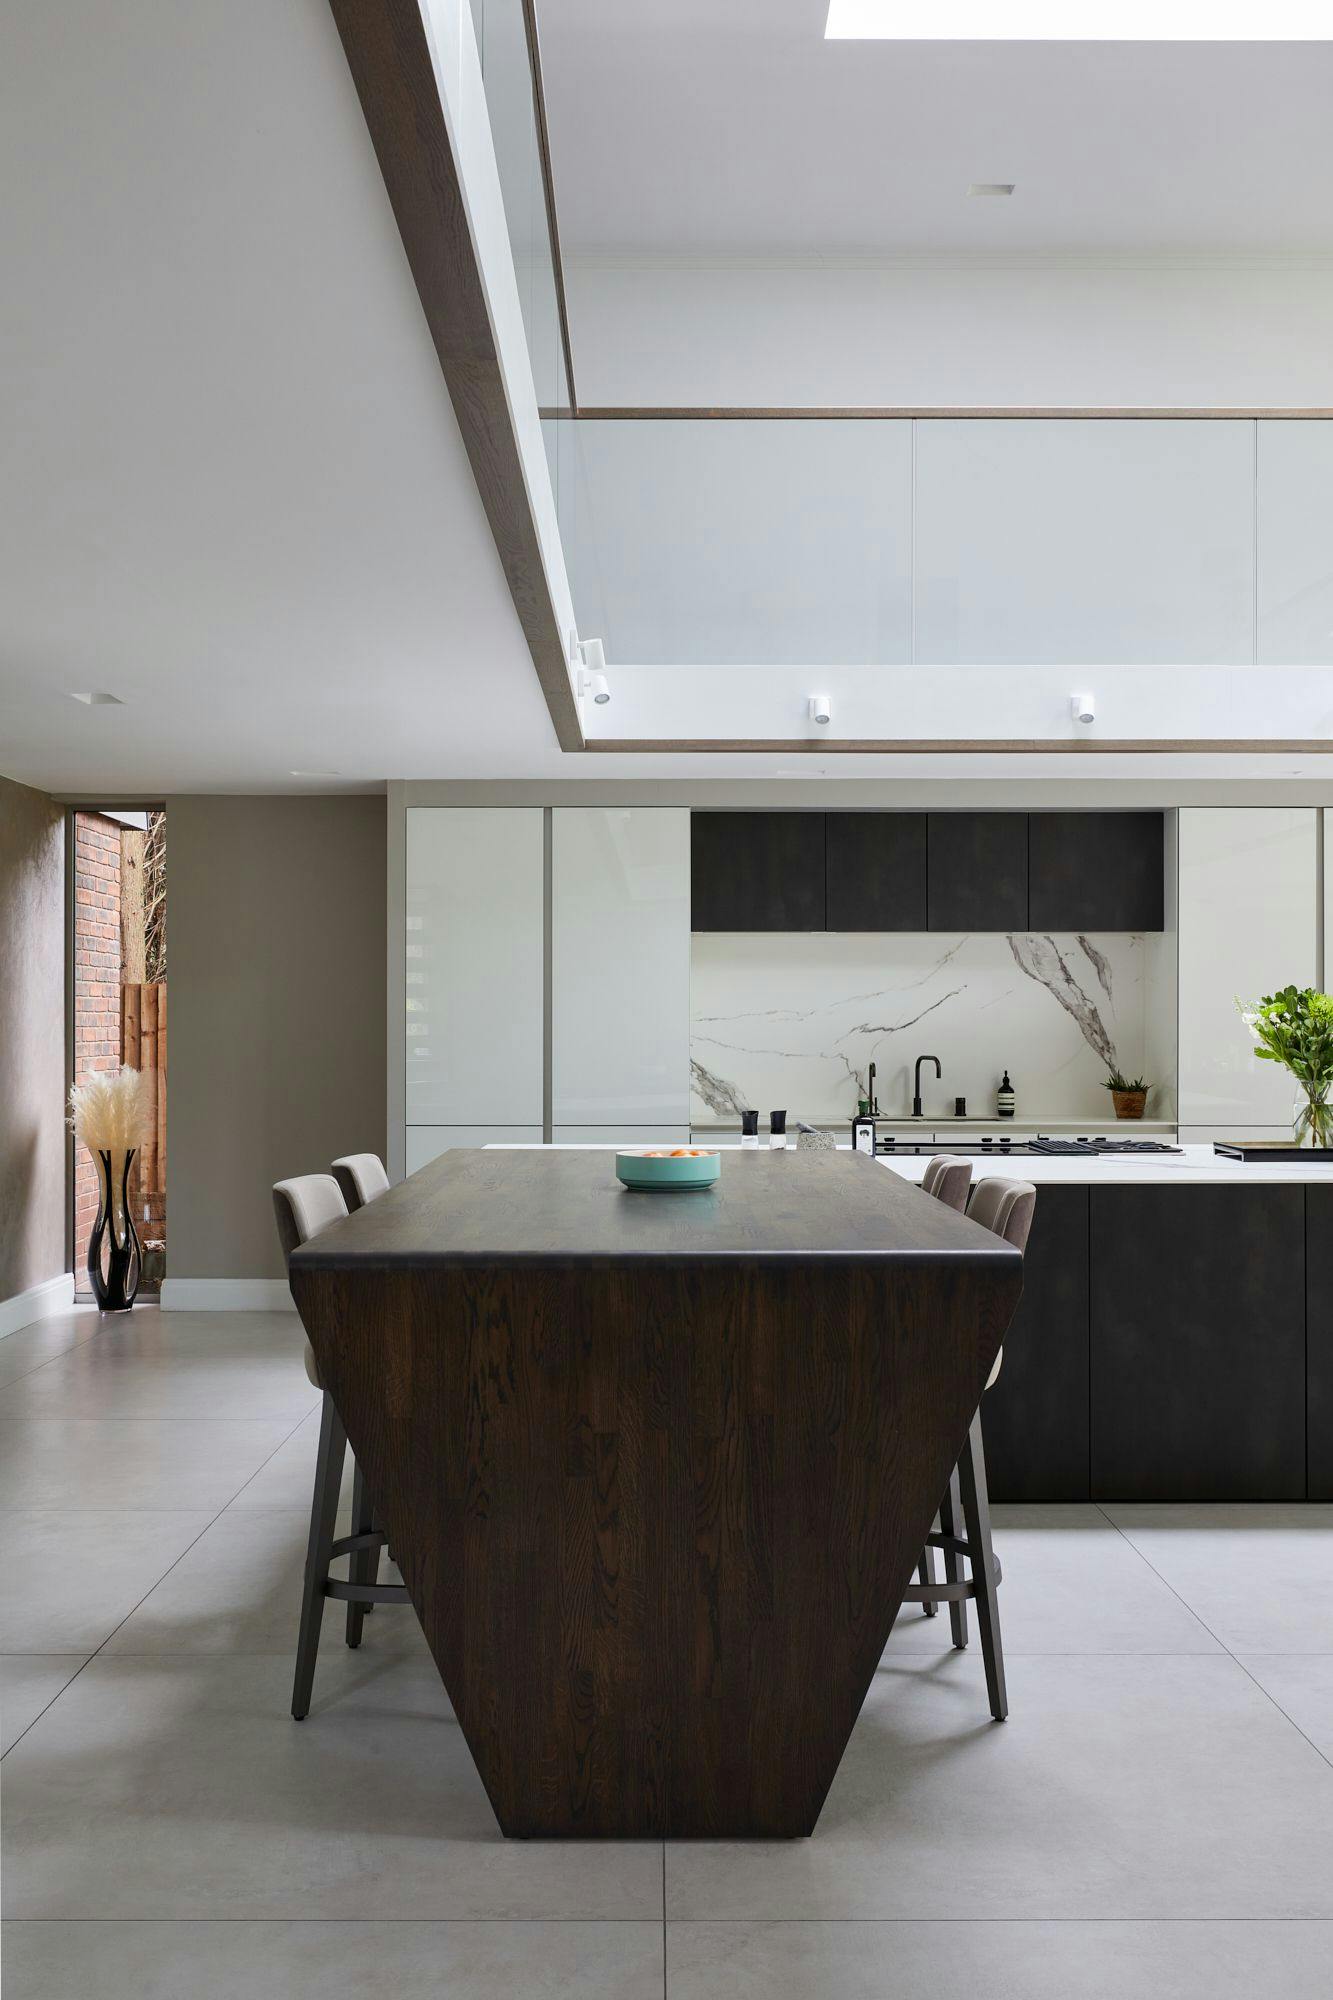 A luxury kitchen based in a modernist property.